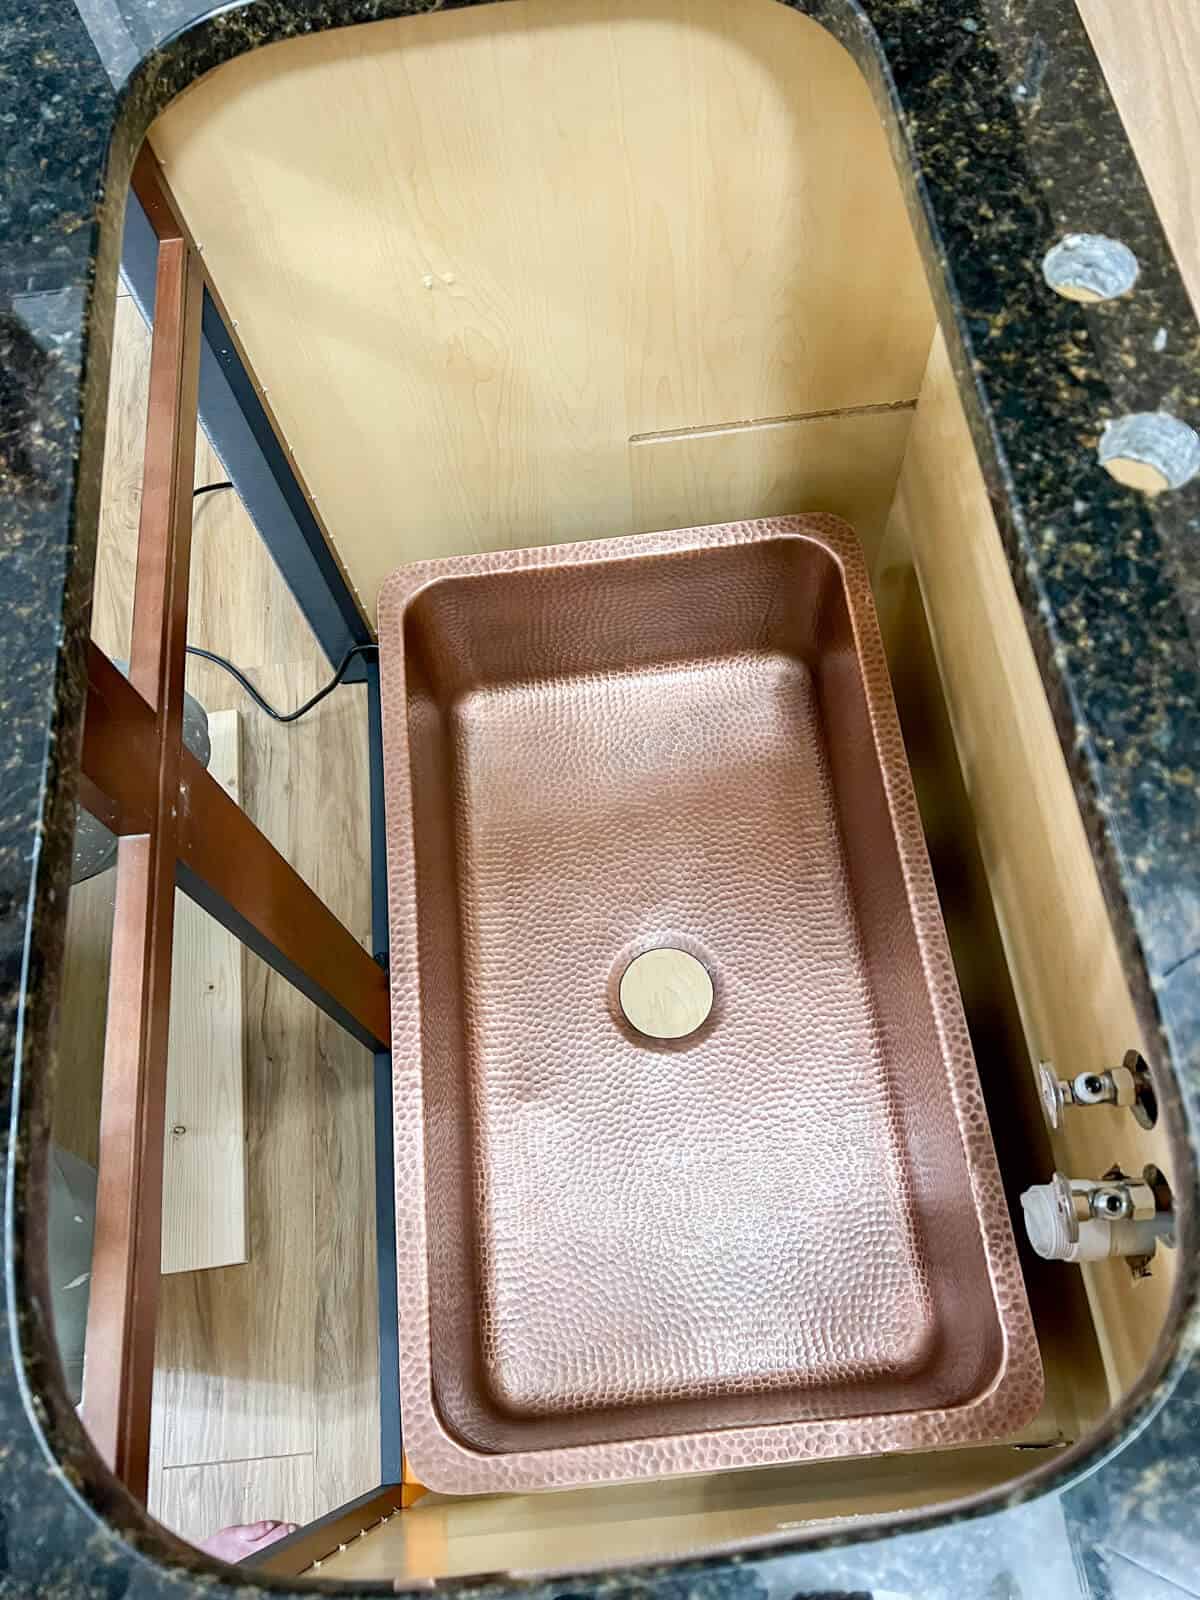 granite kitchen countertop with sink opening cut with a new undermount hammered copper sink getting ready for the install.